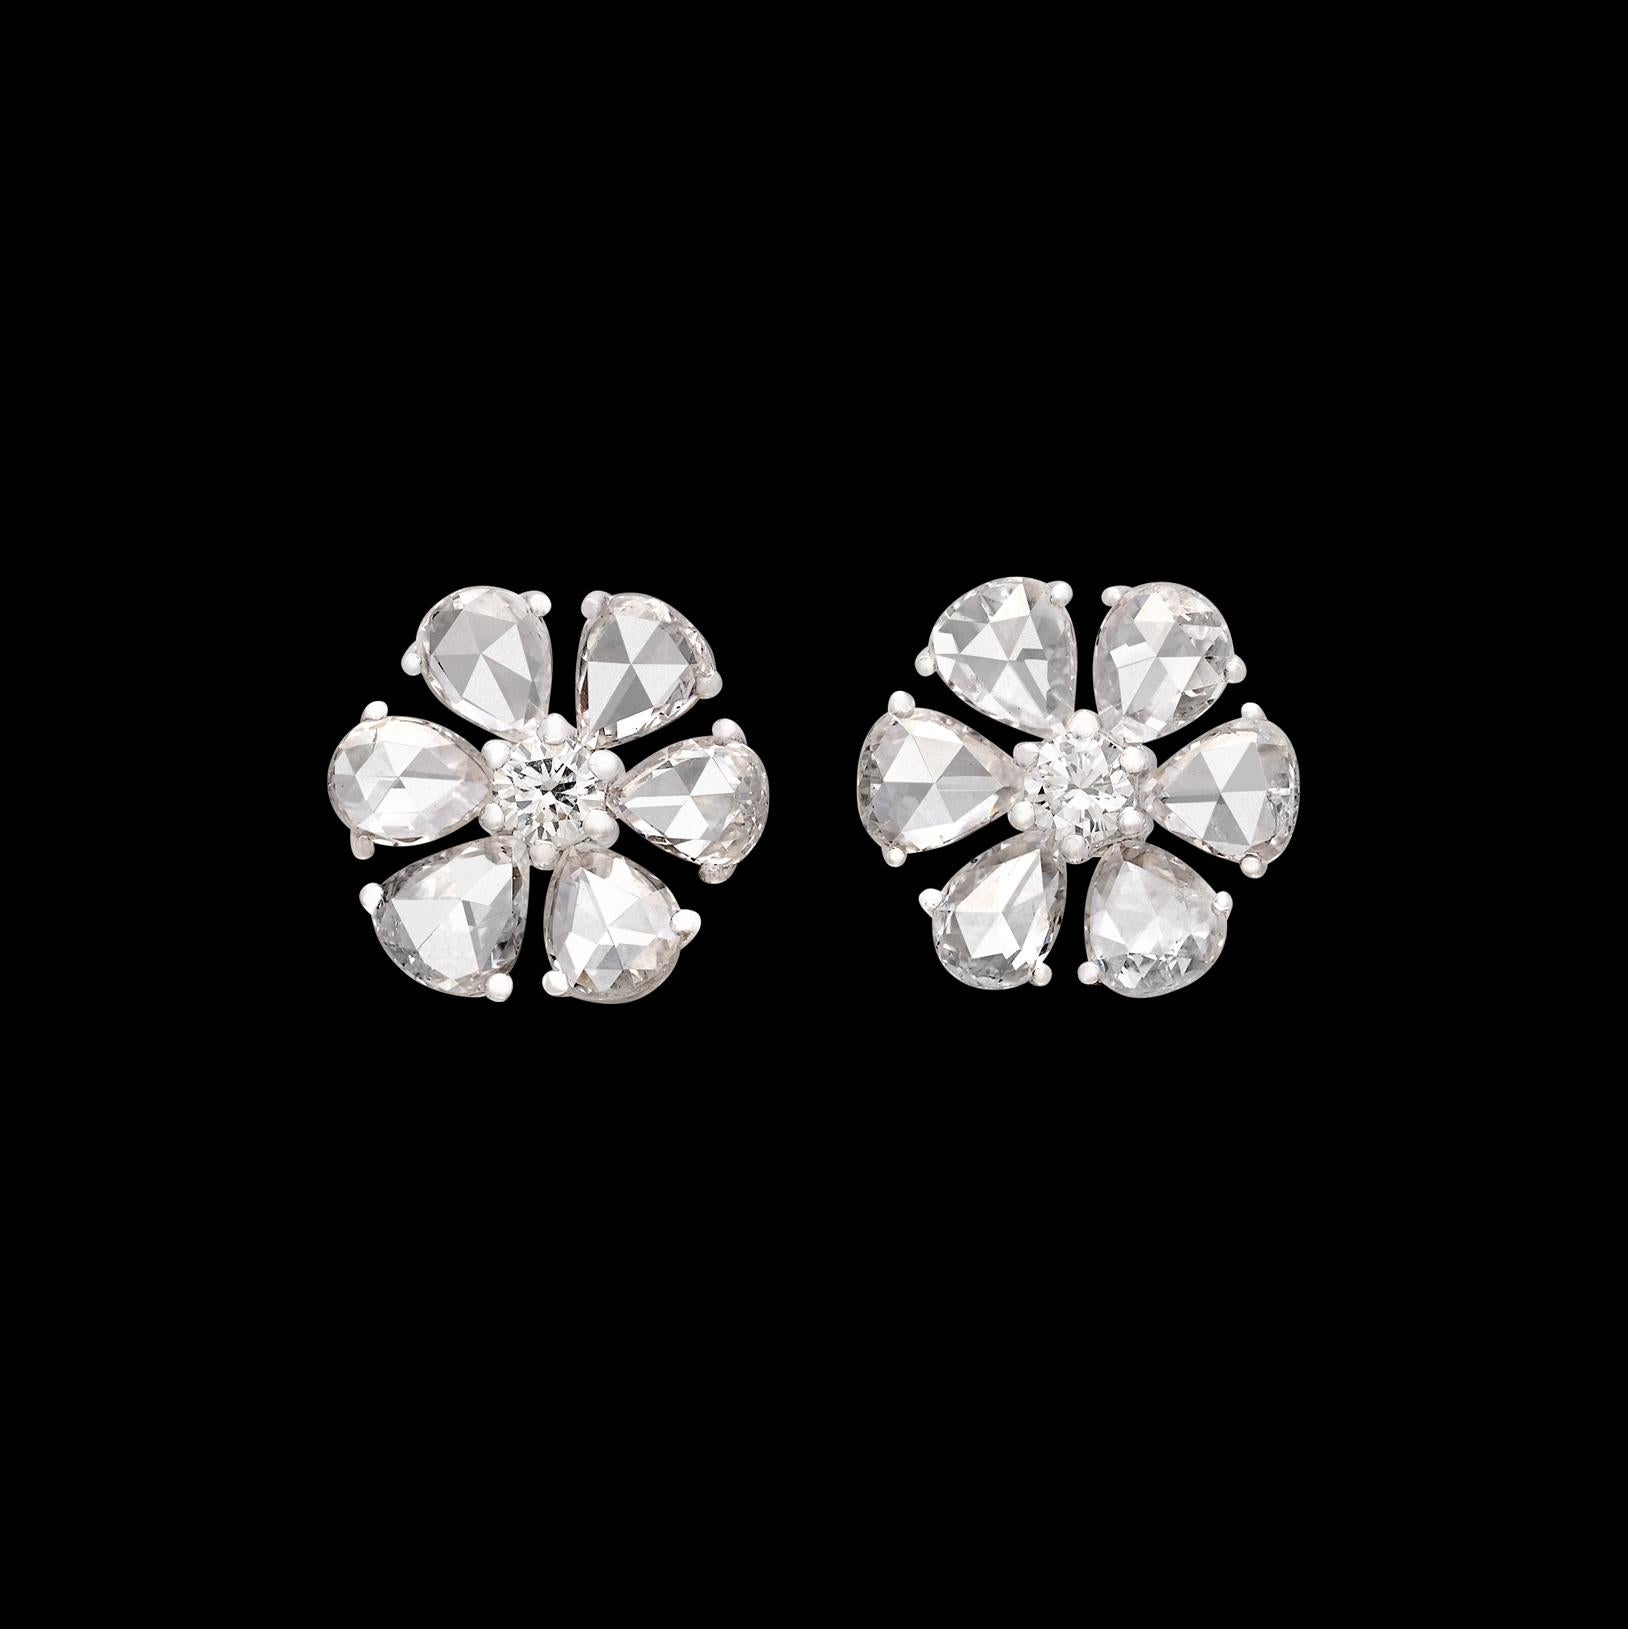 A stunning twist on a classic stud design! These 18 karat white gold stunners feature six expertly cut pear shaped diamond petals on each ear, with a round brilliant cut diamond making up the center of the flower design. The total diamond weight of